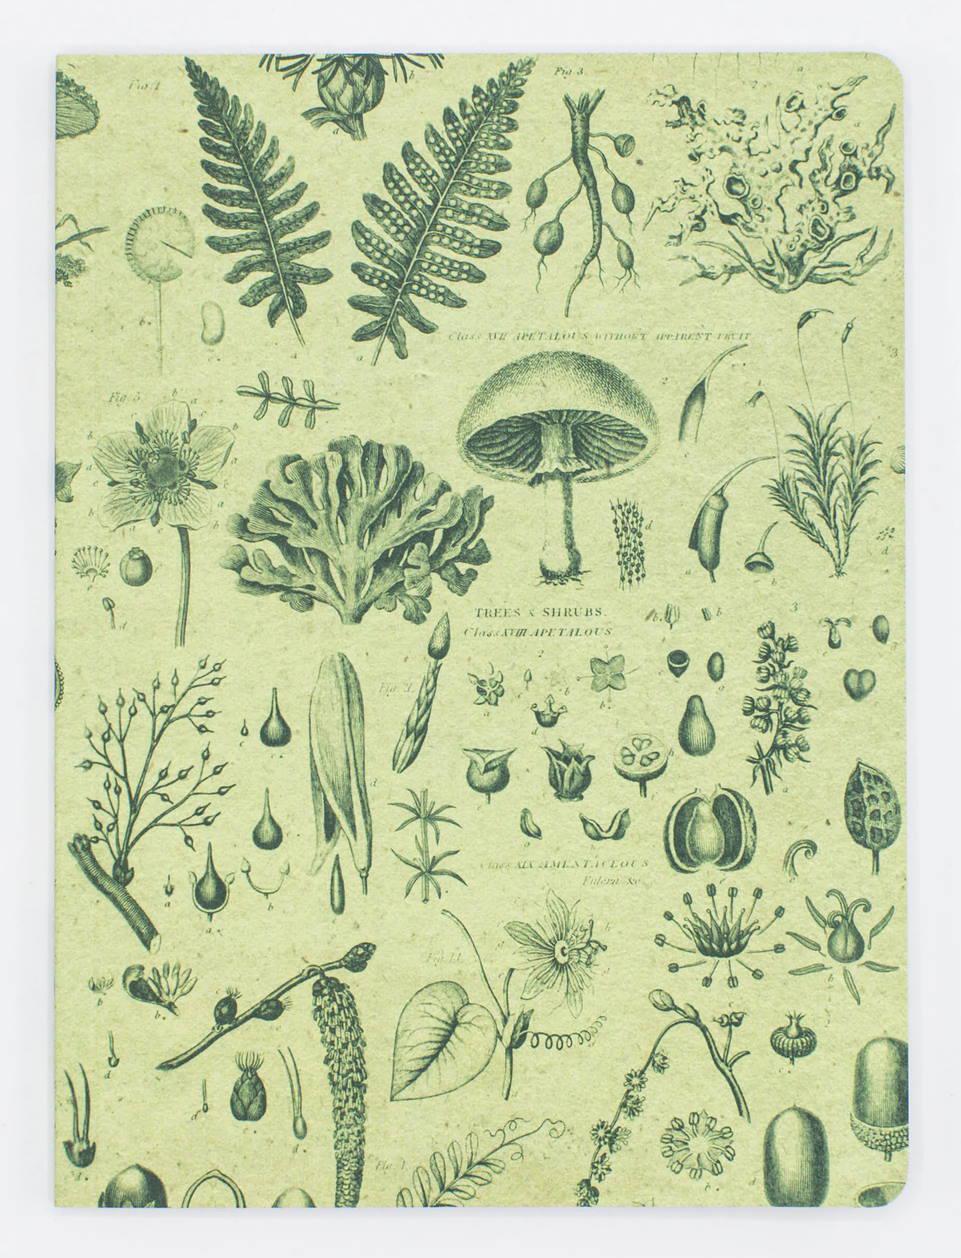 Blank Journal with Plants and Fungi Motif